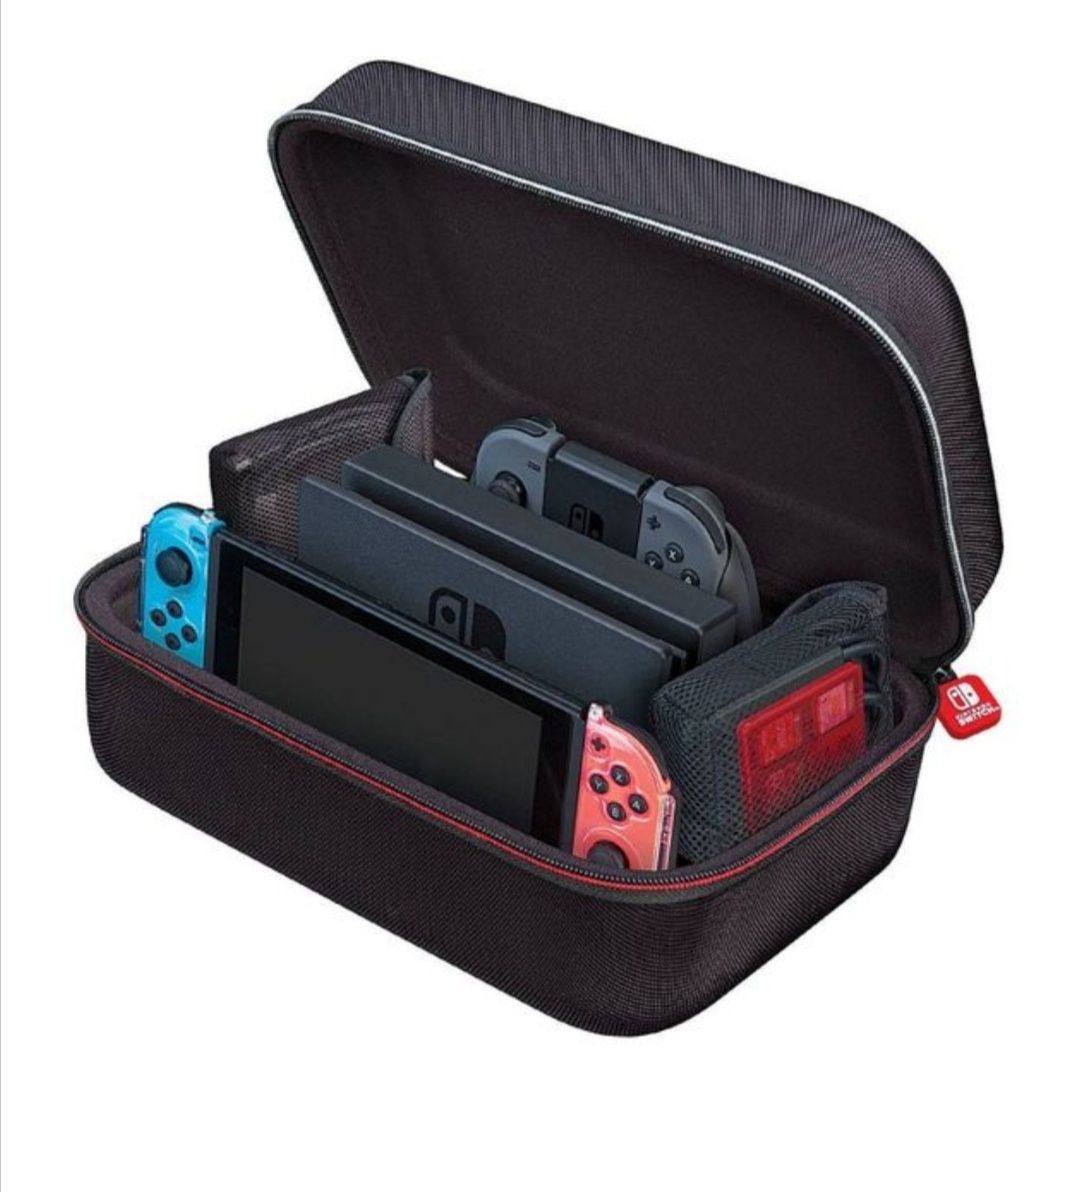 Nintendo Switch - deluxe system case